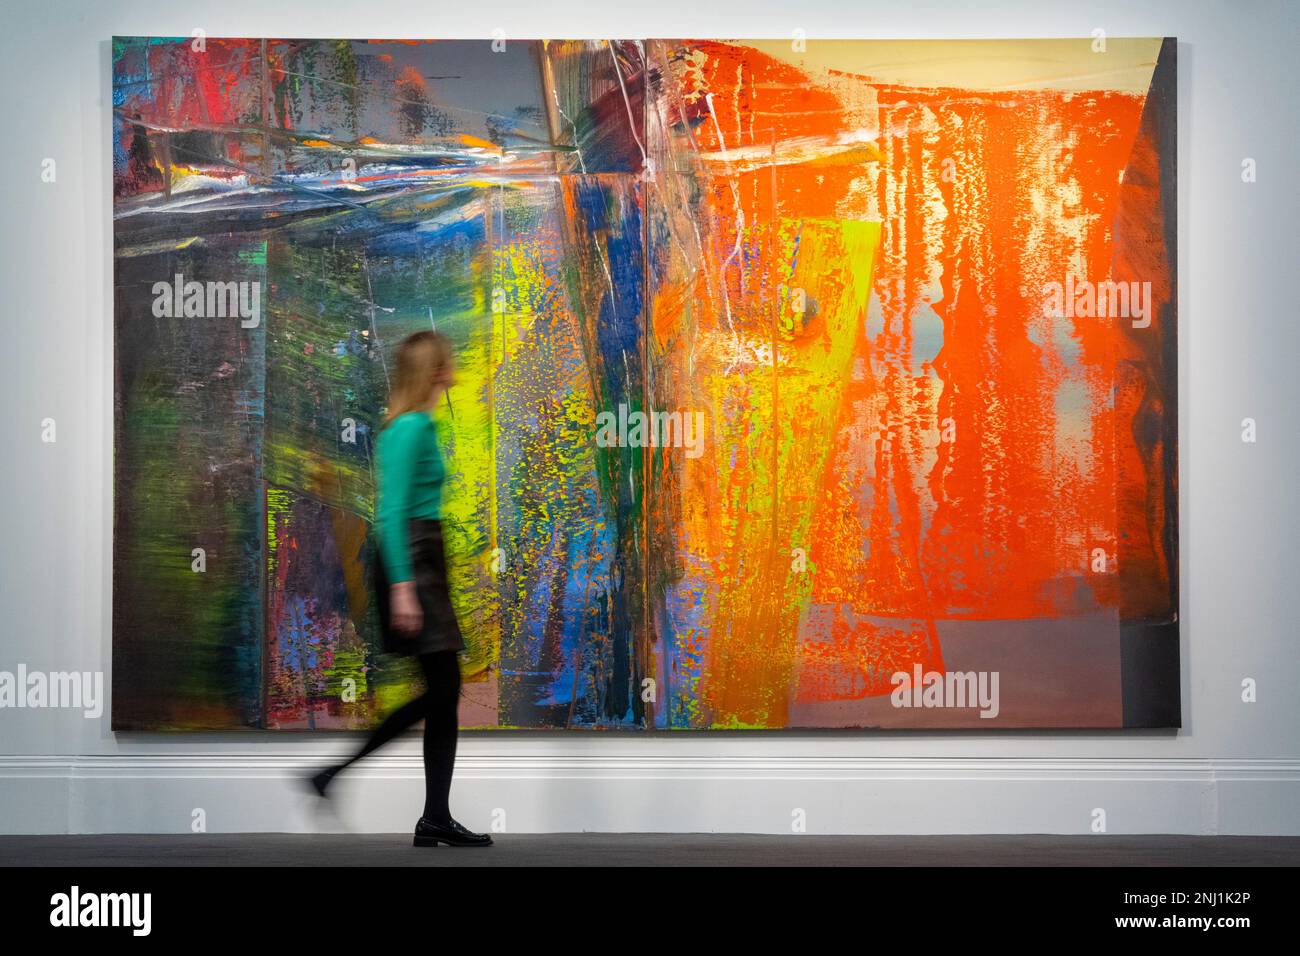 London, UK.  22 February 2023. A staff member passes 'Abstraktes Bild' by Gerhard Richter (Est. in the region of £37 million) at a preview of highlights from Sotheby’s upcoming Modern & Contemporary Evening sale featuring works by Kandinsky, Picasso, Richter and Munch.  The sale takes place at Sotheby’s New Bond Street galleries on 1 March 2023. Credit: Stephen Chung / Alamy Live News Stock Photo